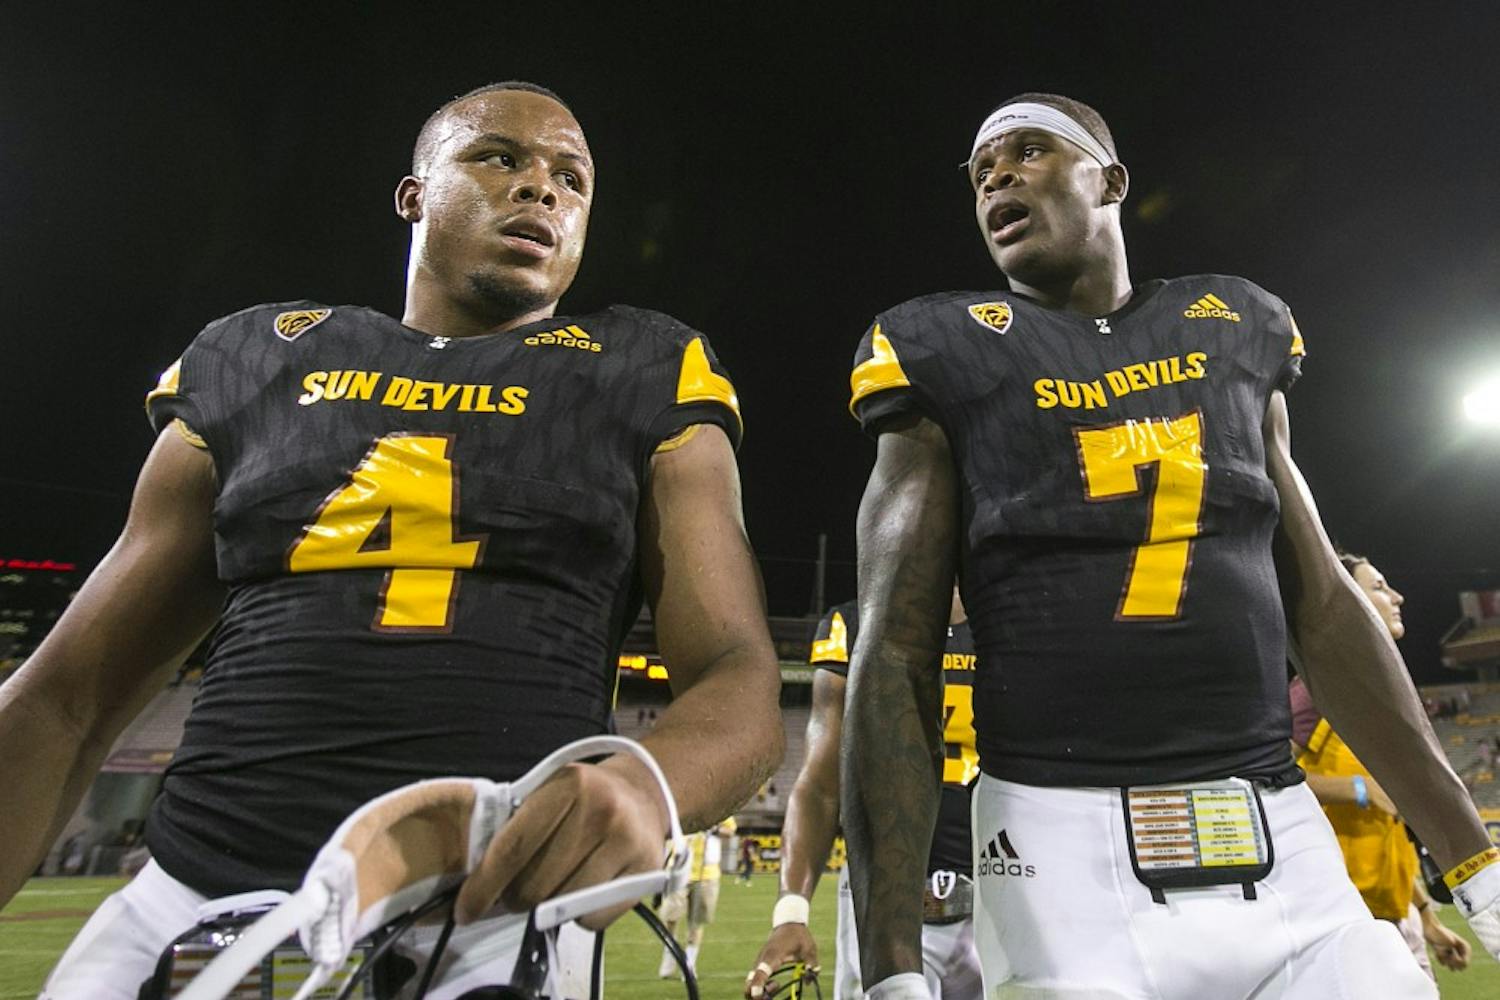 ASU juniors Demario Richard (4) and Kalen Ballage (7) walk off the field after a game against the Texas Tech Red Raiders in Sun Devil Stadium on Saturday, Sept. 10, 2016. 